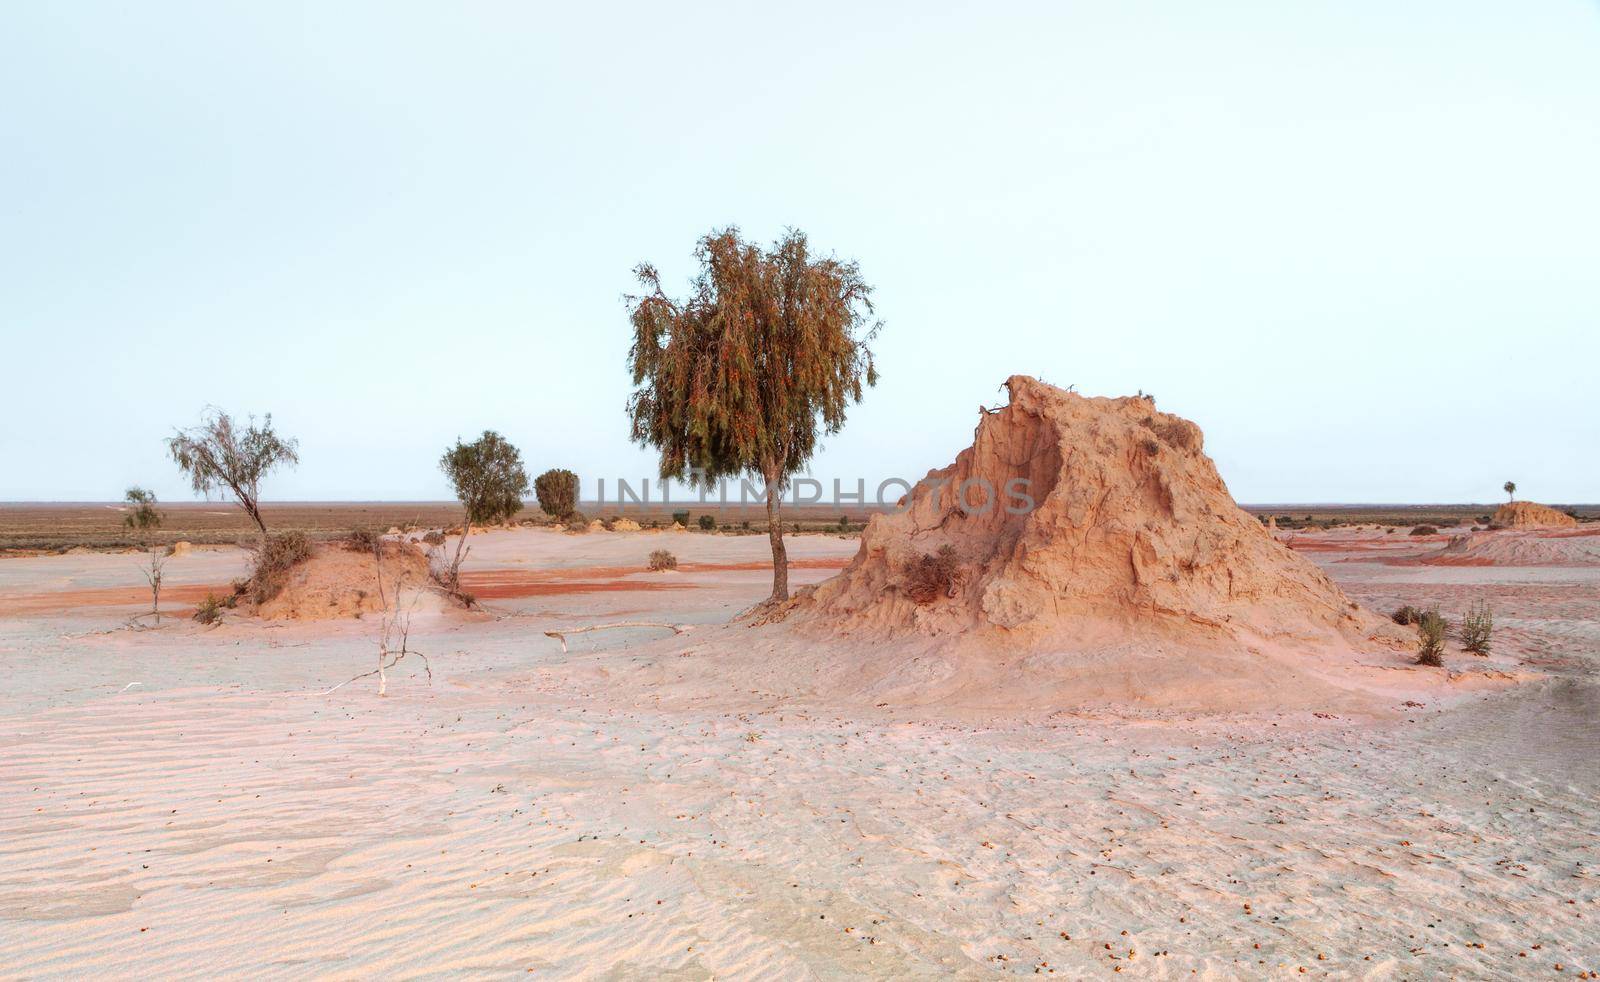 Mounds in the Australian desert support the only trees around as they are a mixture of sand and clays. Drifting colours of ochre clays can also be seen